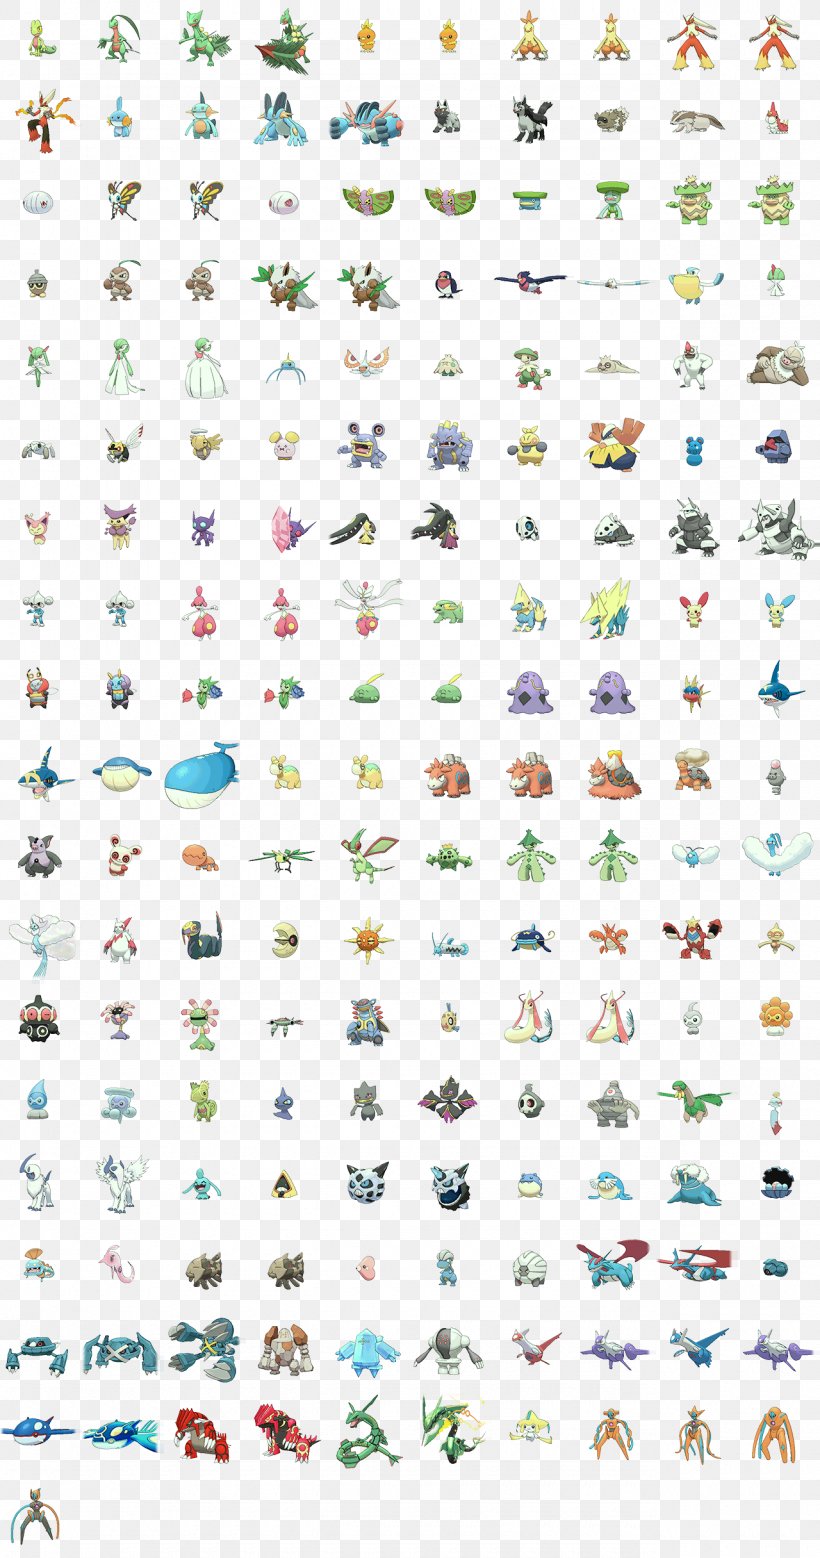 Pokémon Omega Ruby And Alpha Sapphire Pokémon Ruby And Sapphire Pokémon GO Pokémon FireRed And LeafGreen Pikachu, PNG, 1280x2432px, Pokemon Ruby And Sapphire, Area, Azelf, Green, Material Download Free